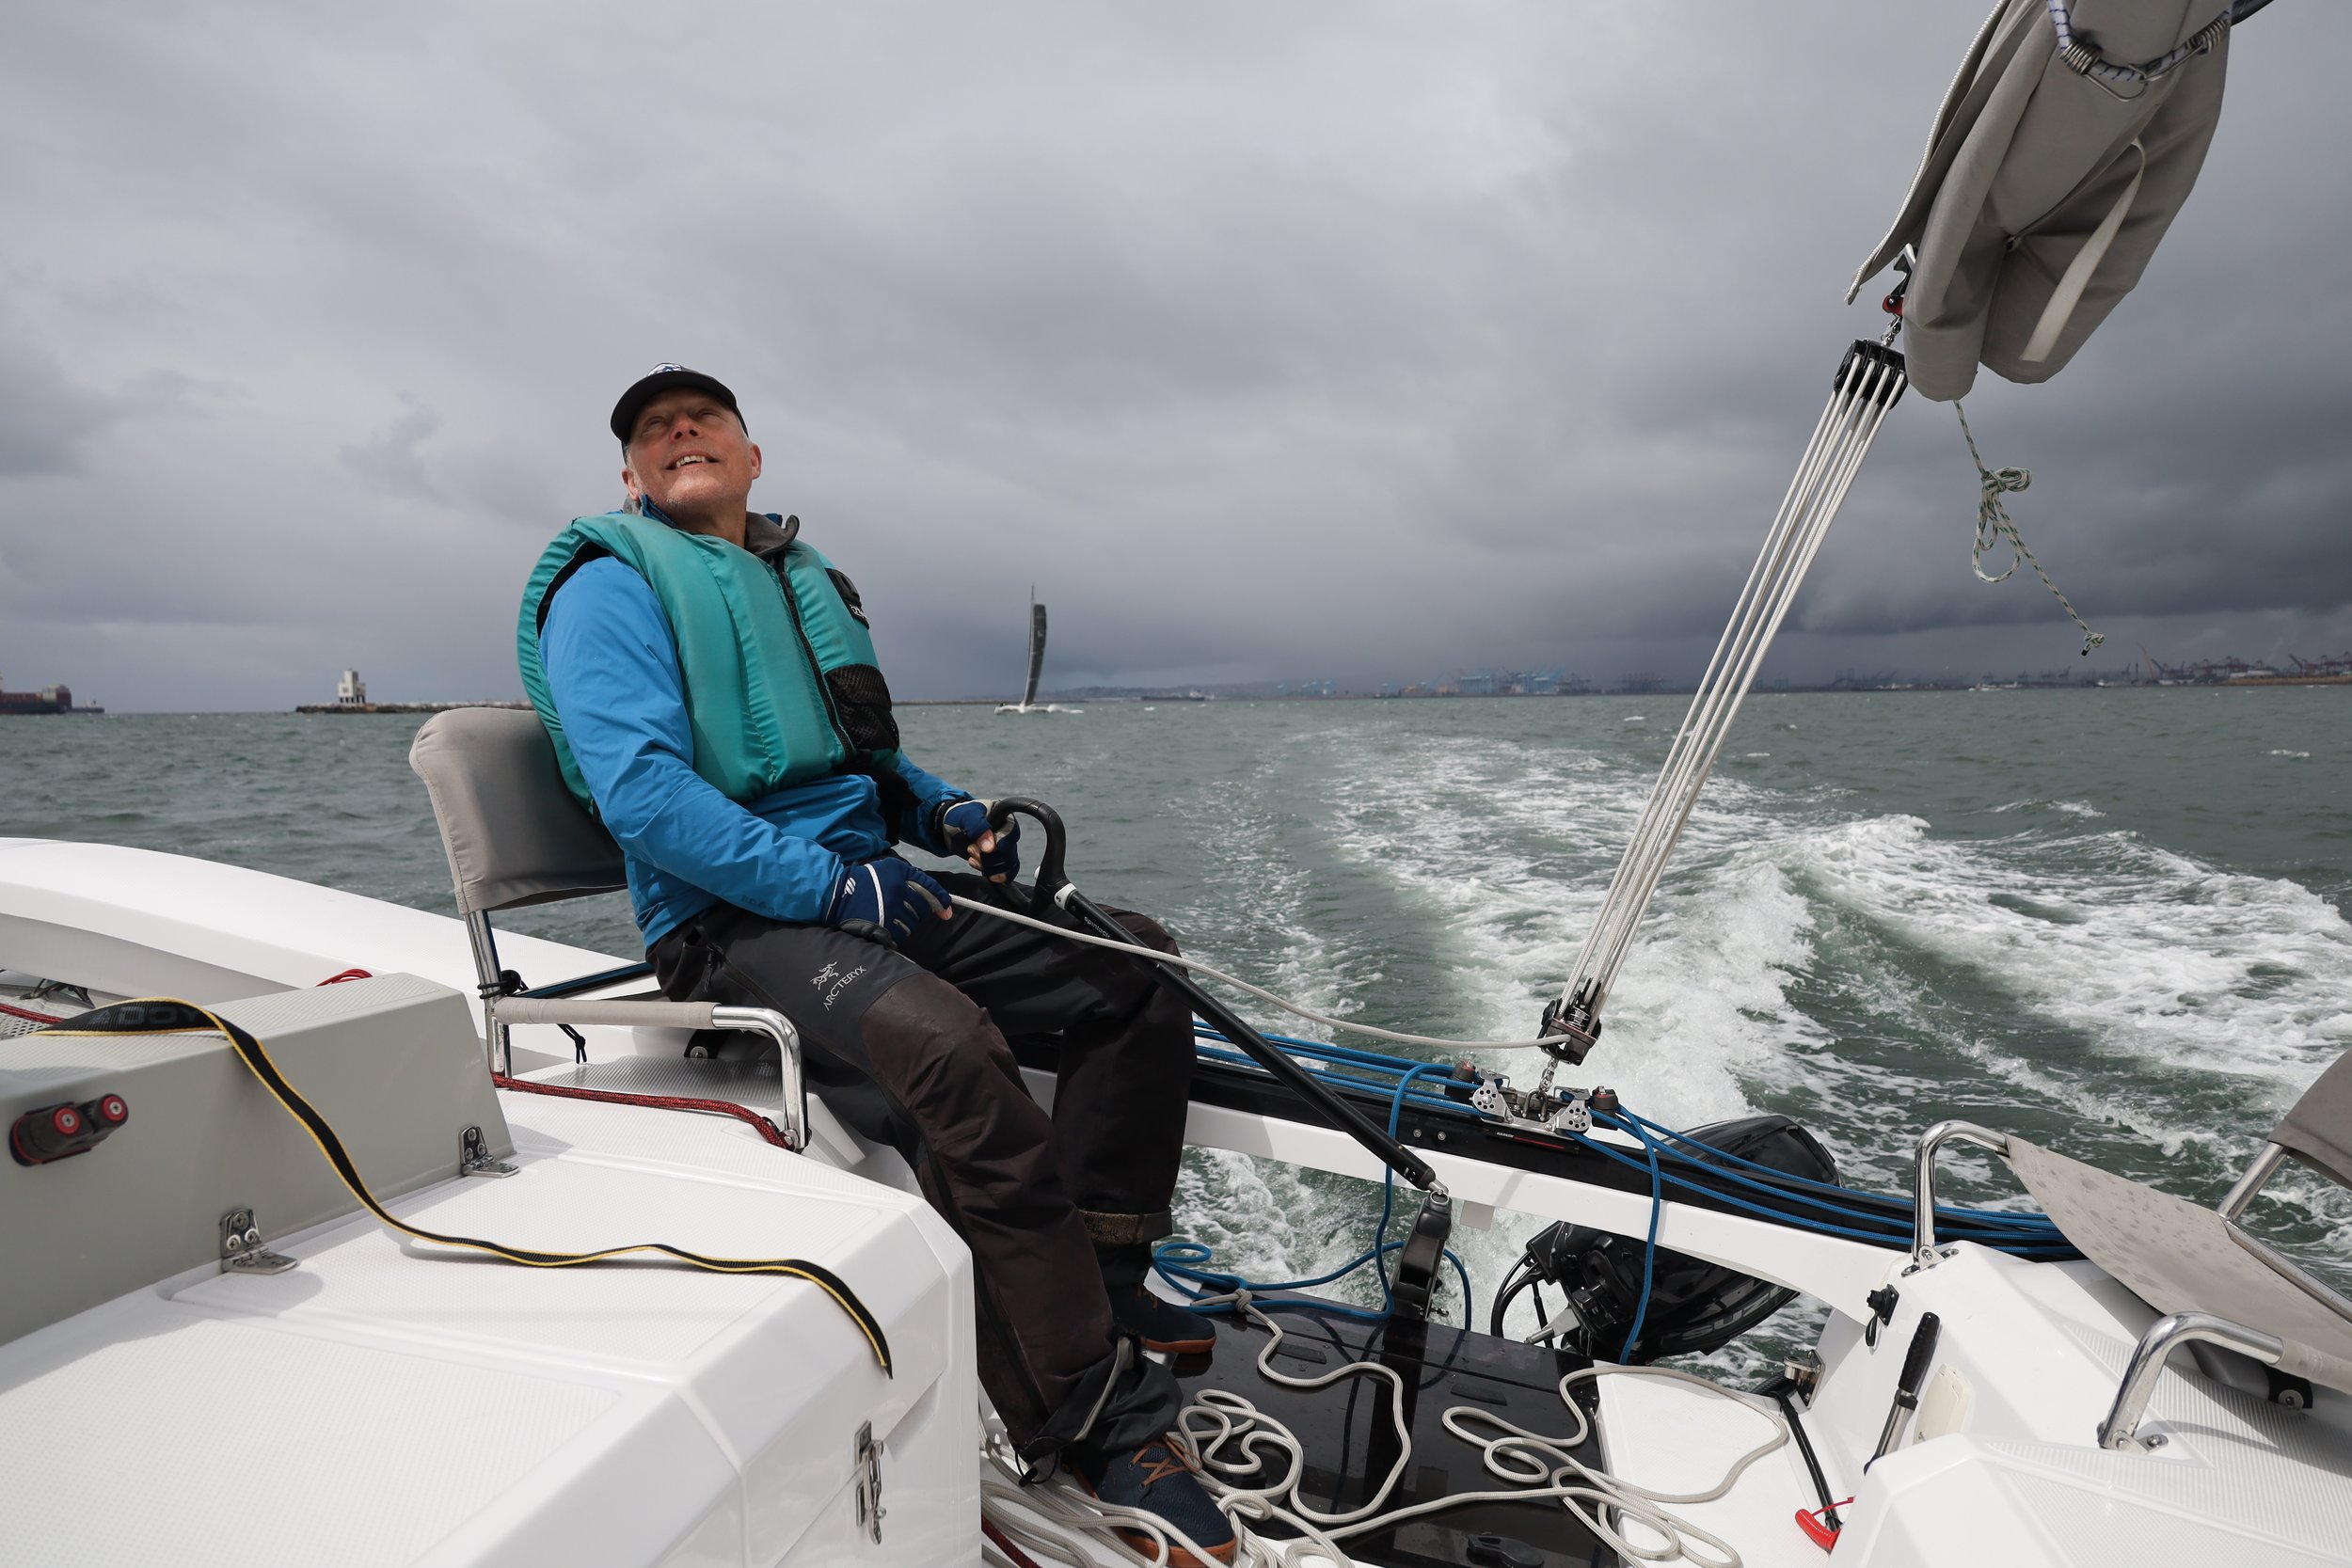 Jim at helm in wind.jpeg